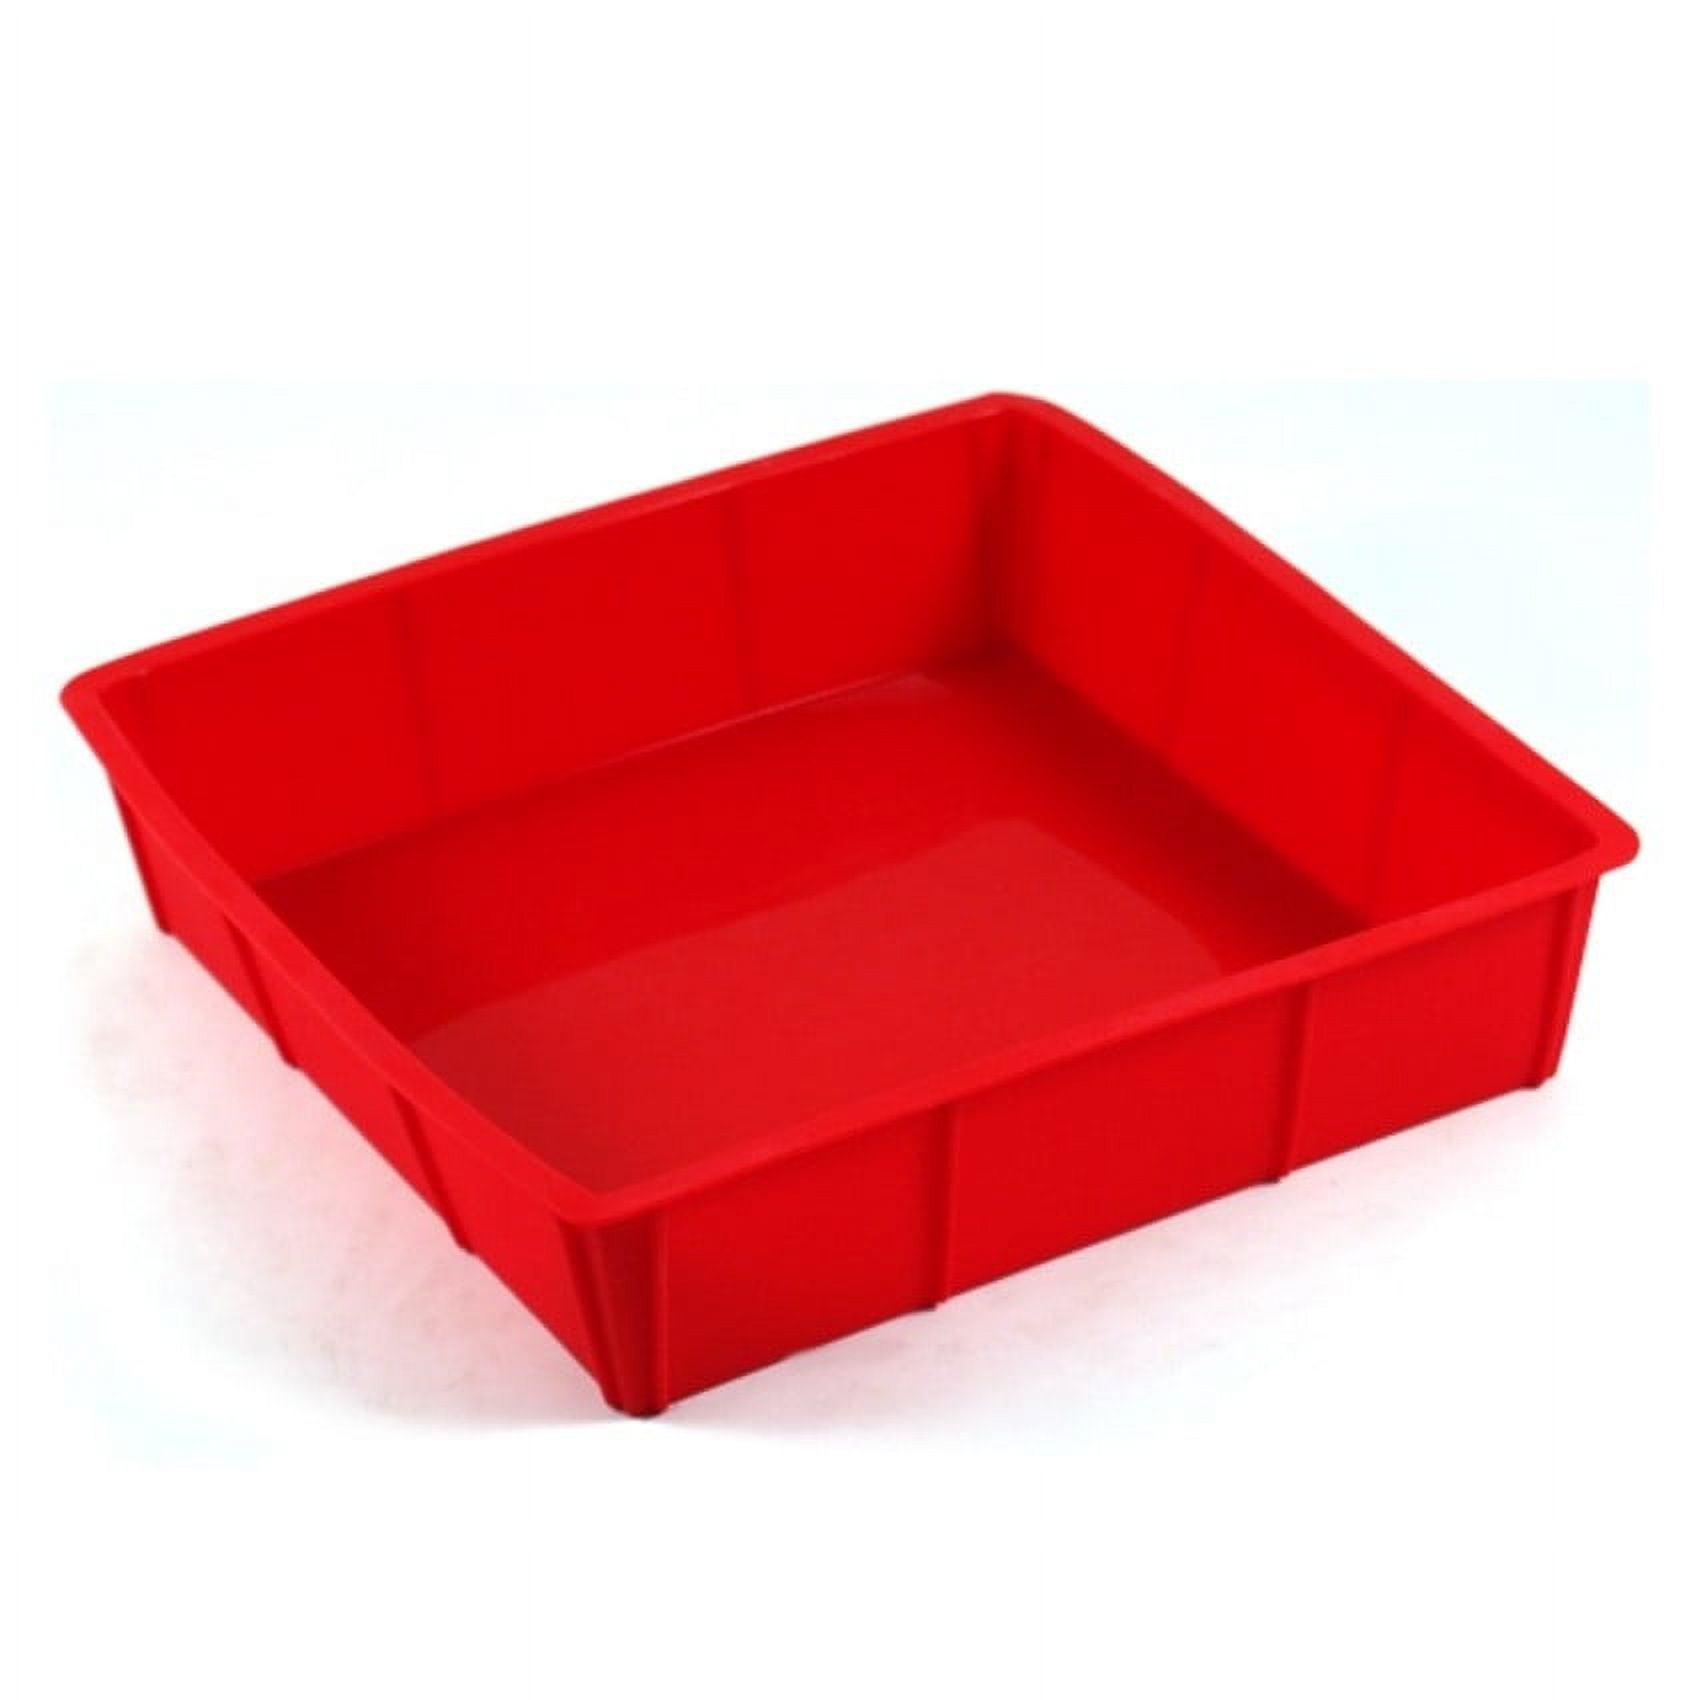 USA Pans 9inch Square Cake Pan - Silicone Nonstick Coating - Cutler's